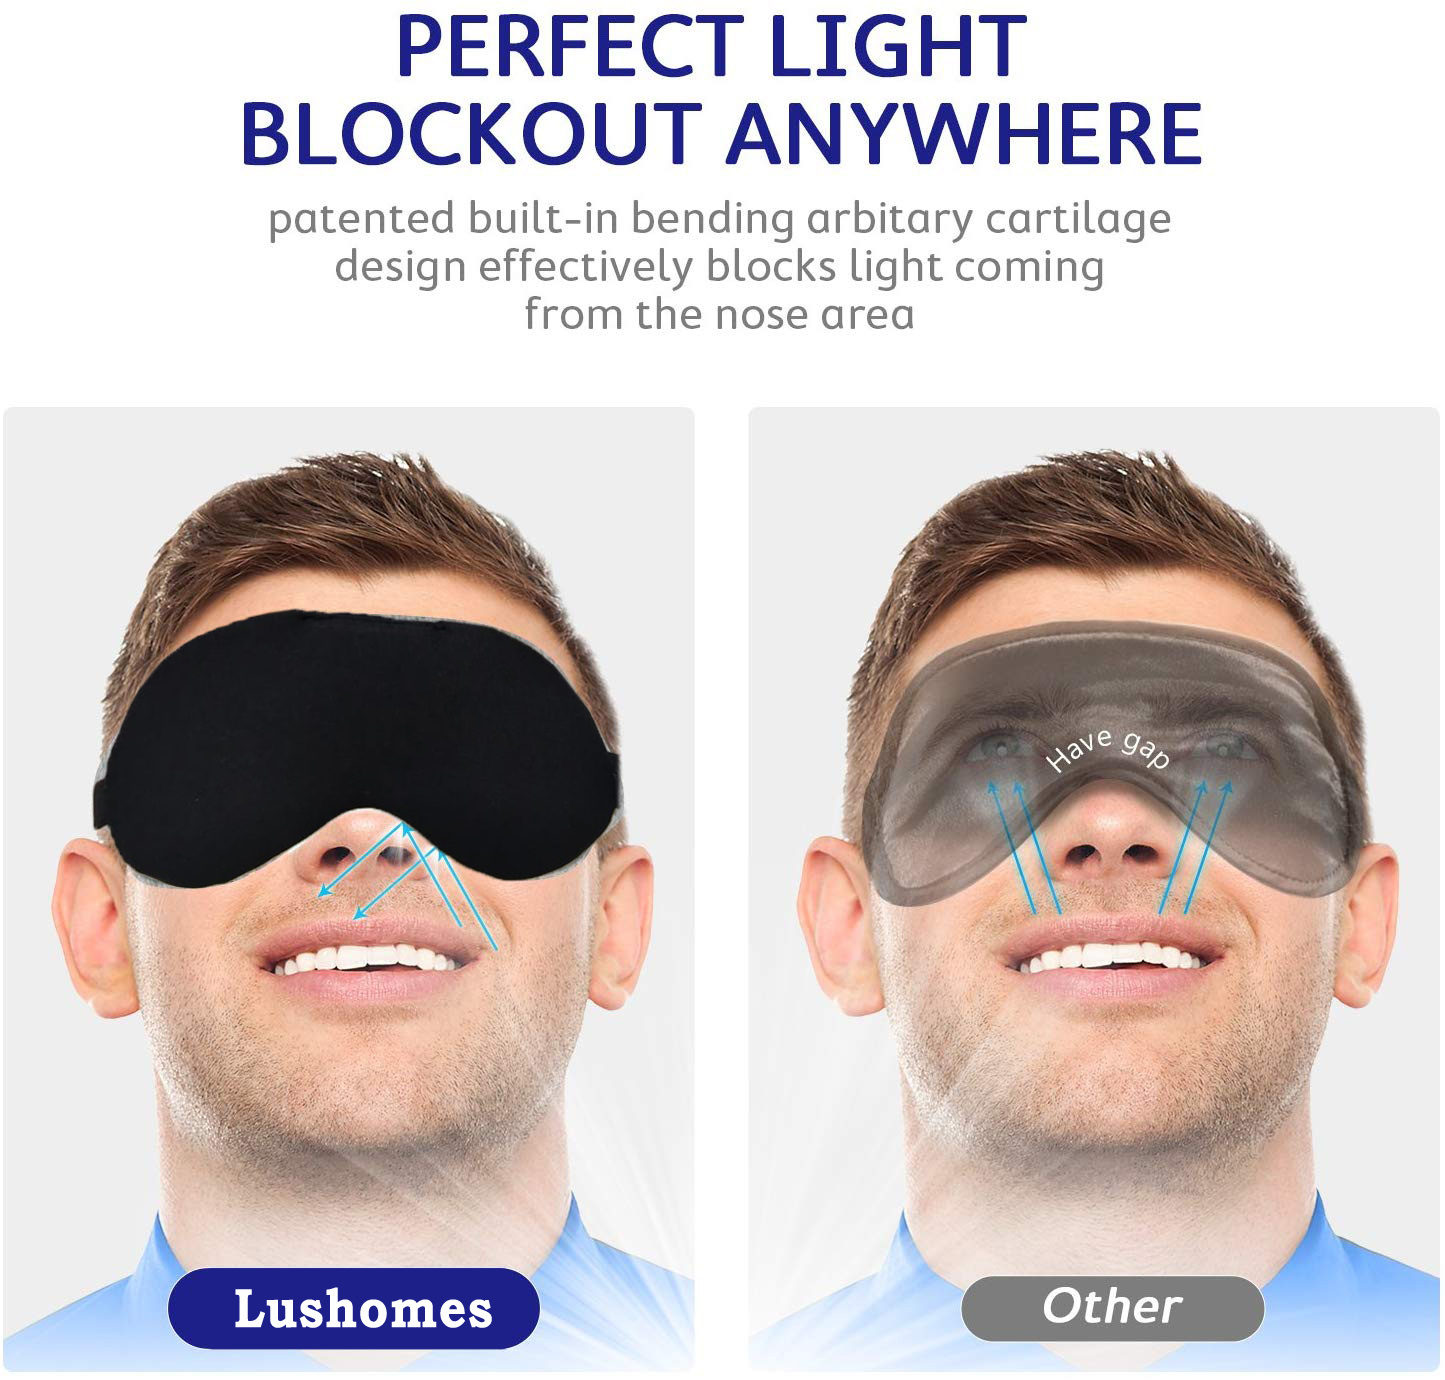 Buy Pack Of 4 Lushomes Light Blocking Sleep Mask Soft And Comfortable For Men And Women Online 